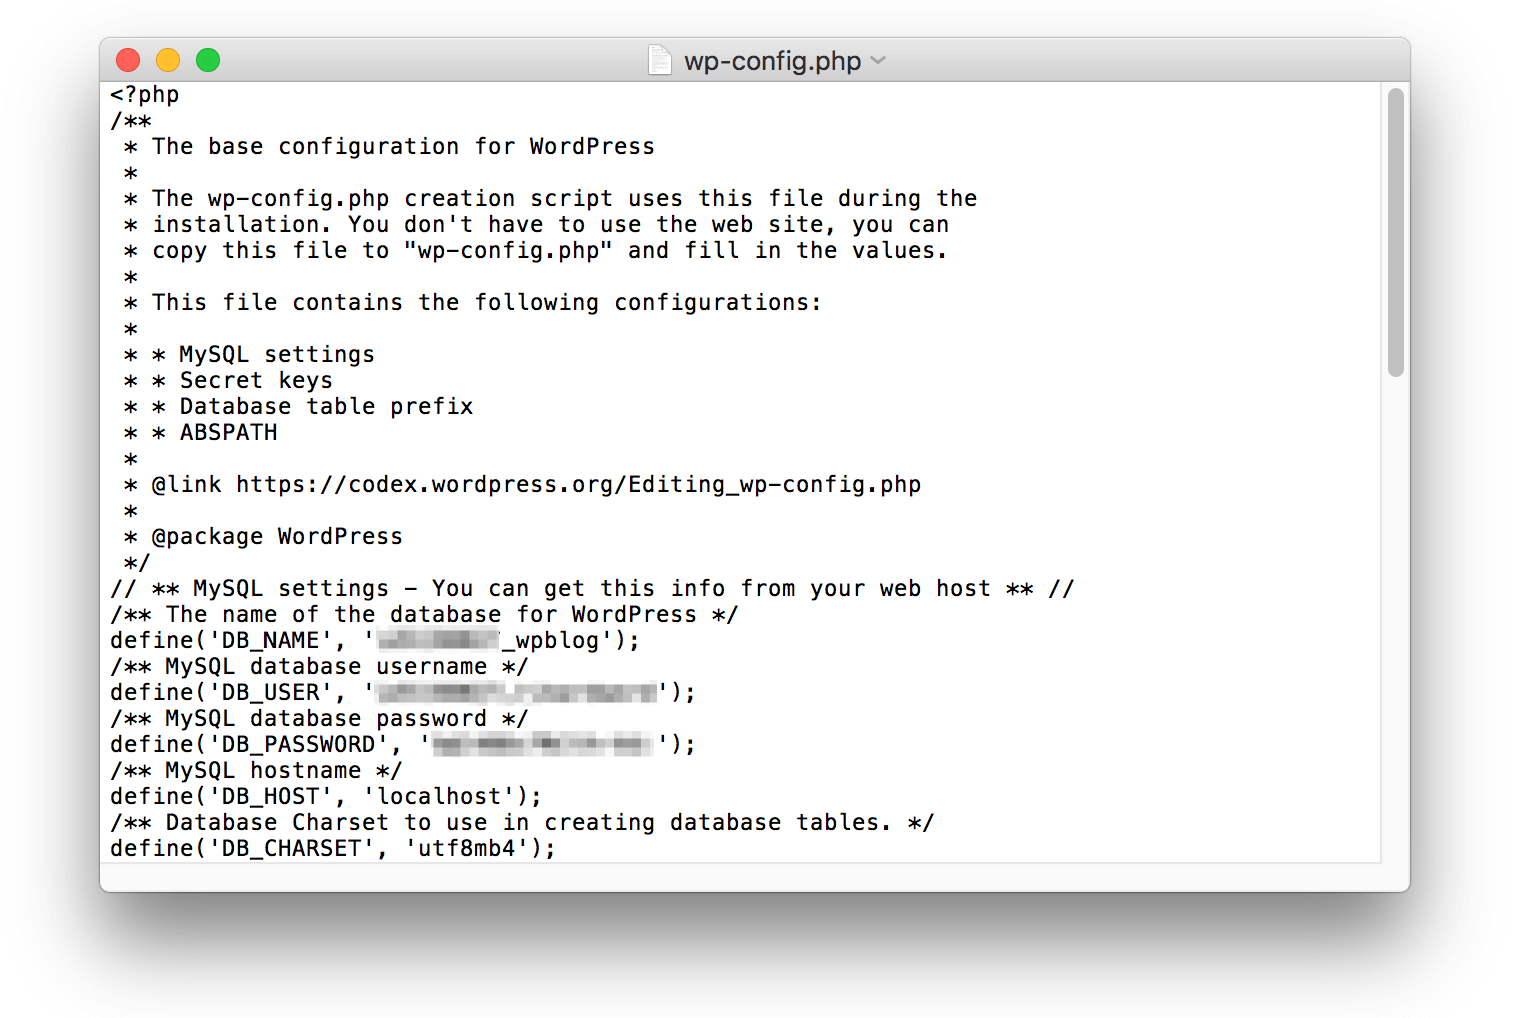 The wp-config.php file open in TextEdit.